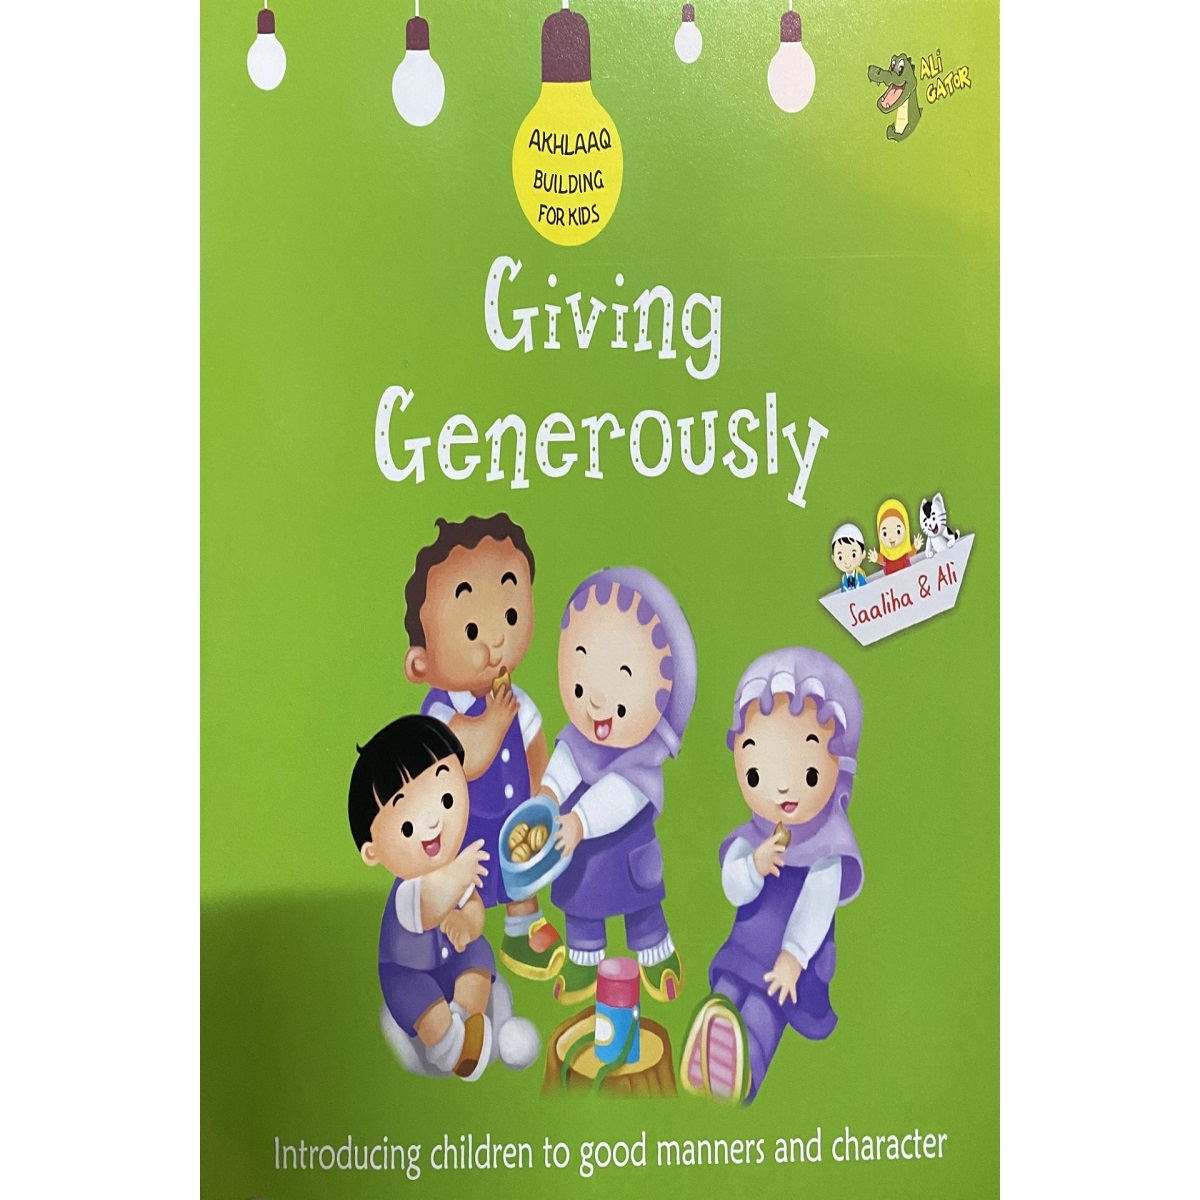 https://www.tarbiyahbooksplus.com/shop/islamic-books-and-products-for-children/shop-by-age-2-5-years/saaliha-ali-giving-generously/